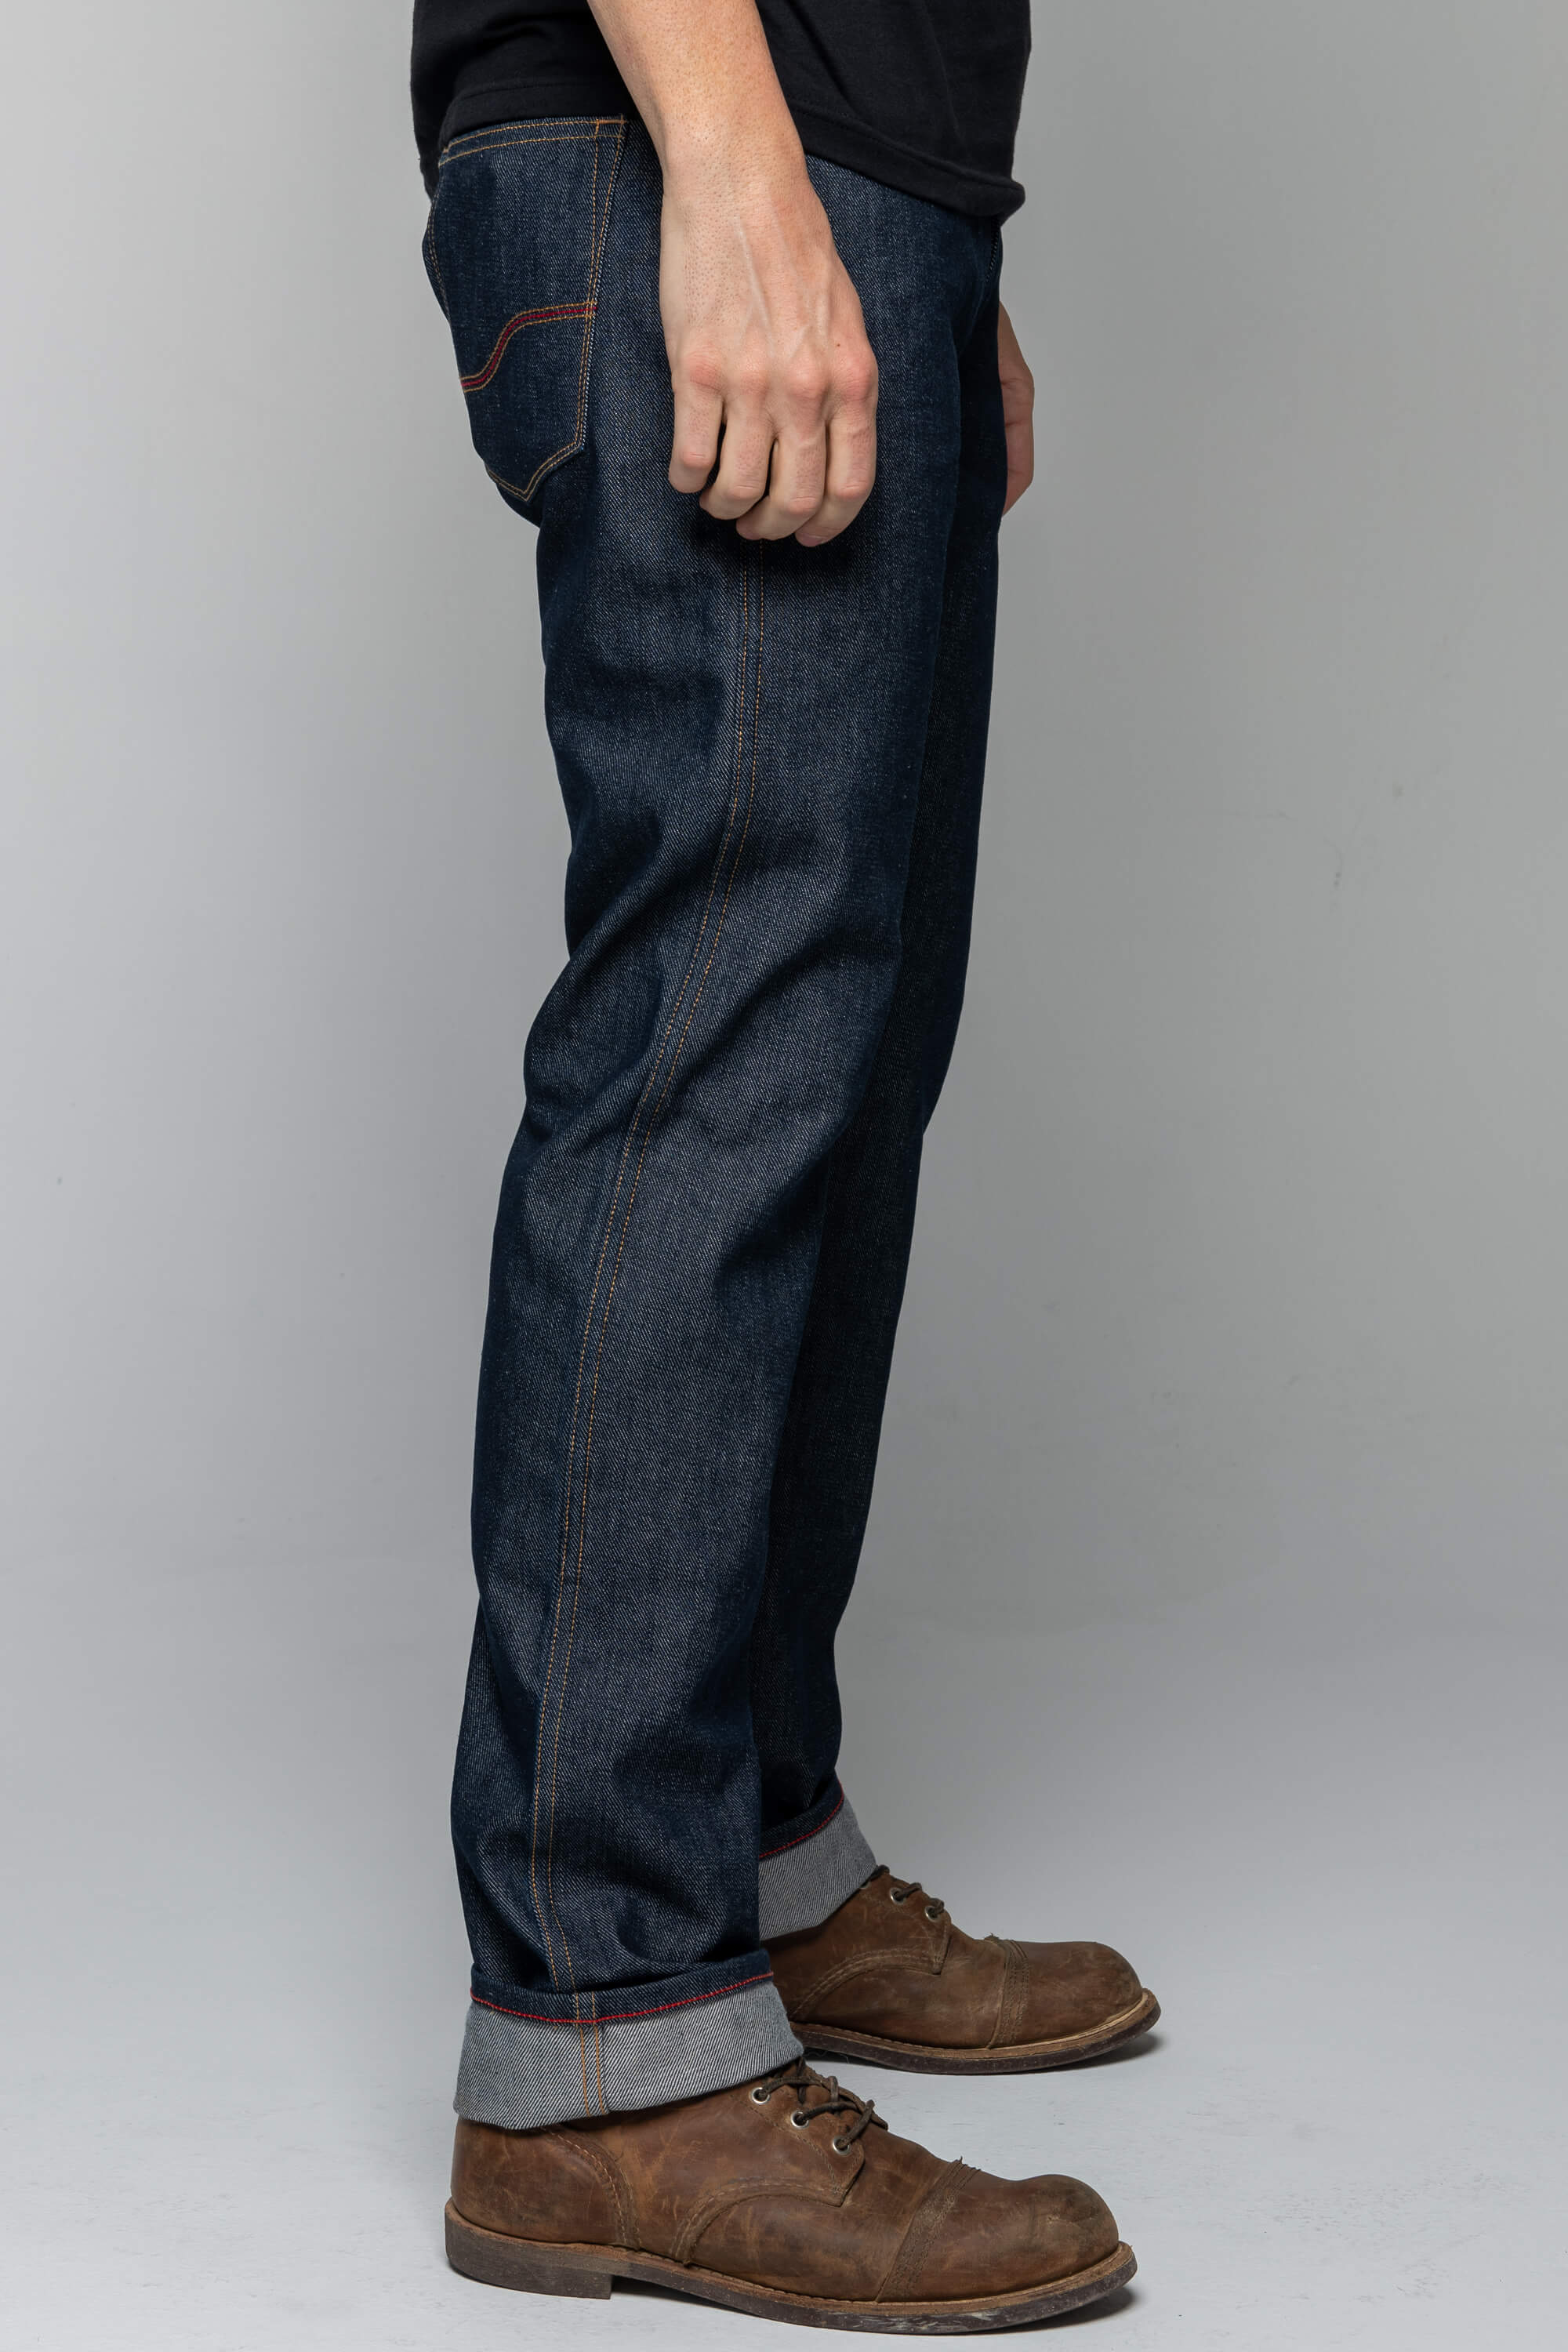 Caballo Relaxed Fit Indigo Protective Riding Jeans - Feat